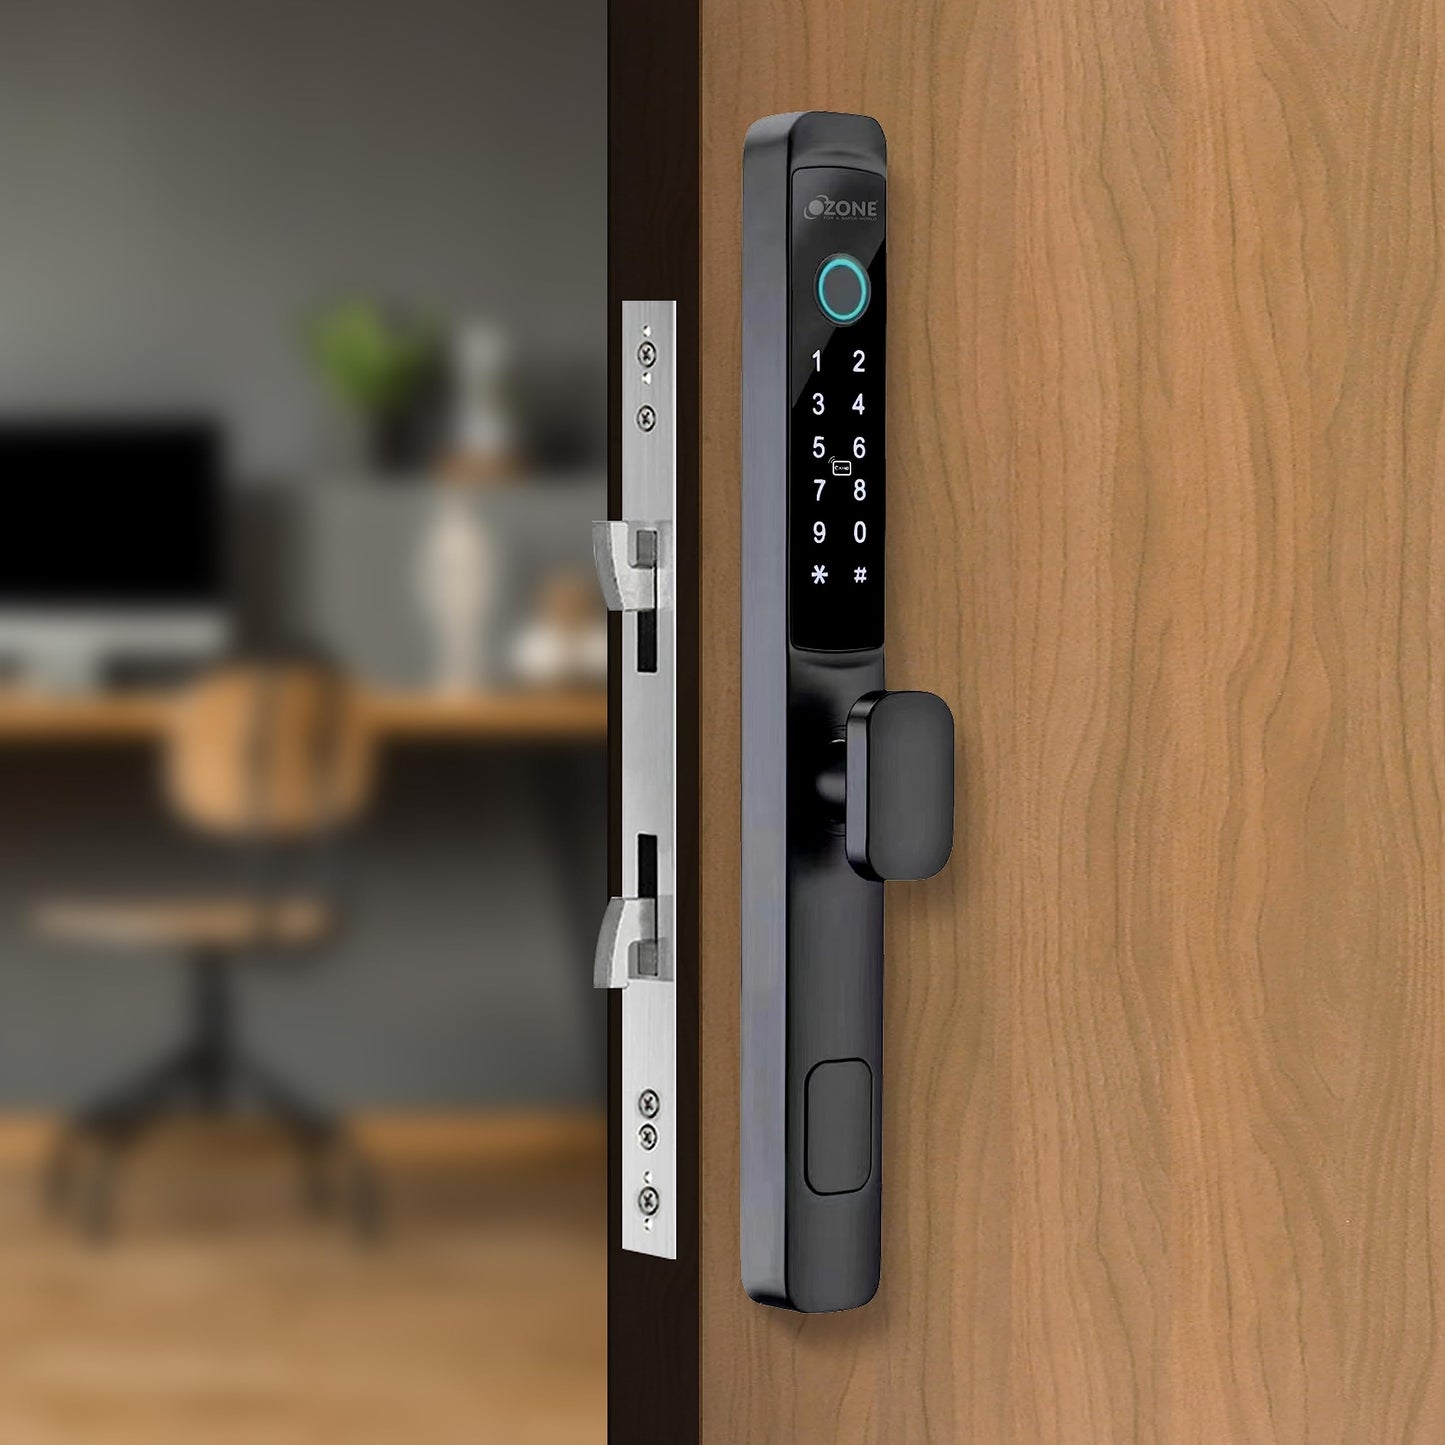 Ozone Narrow Style Wi-Fi Smart Lock with 5-way access | Door Thickness: 35-80 mm